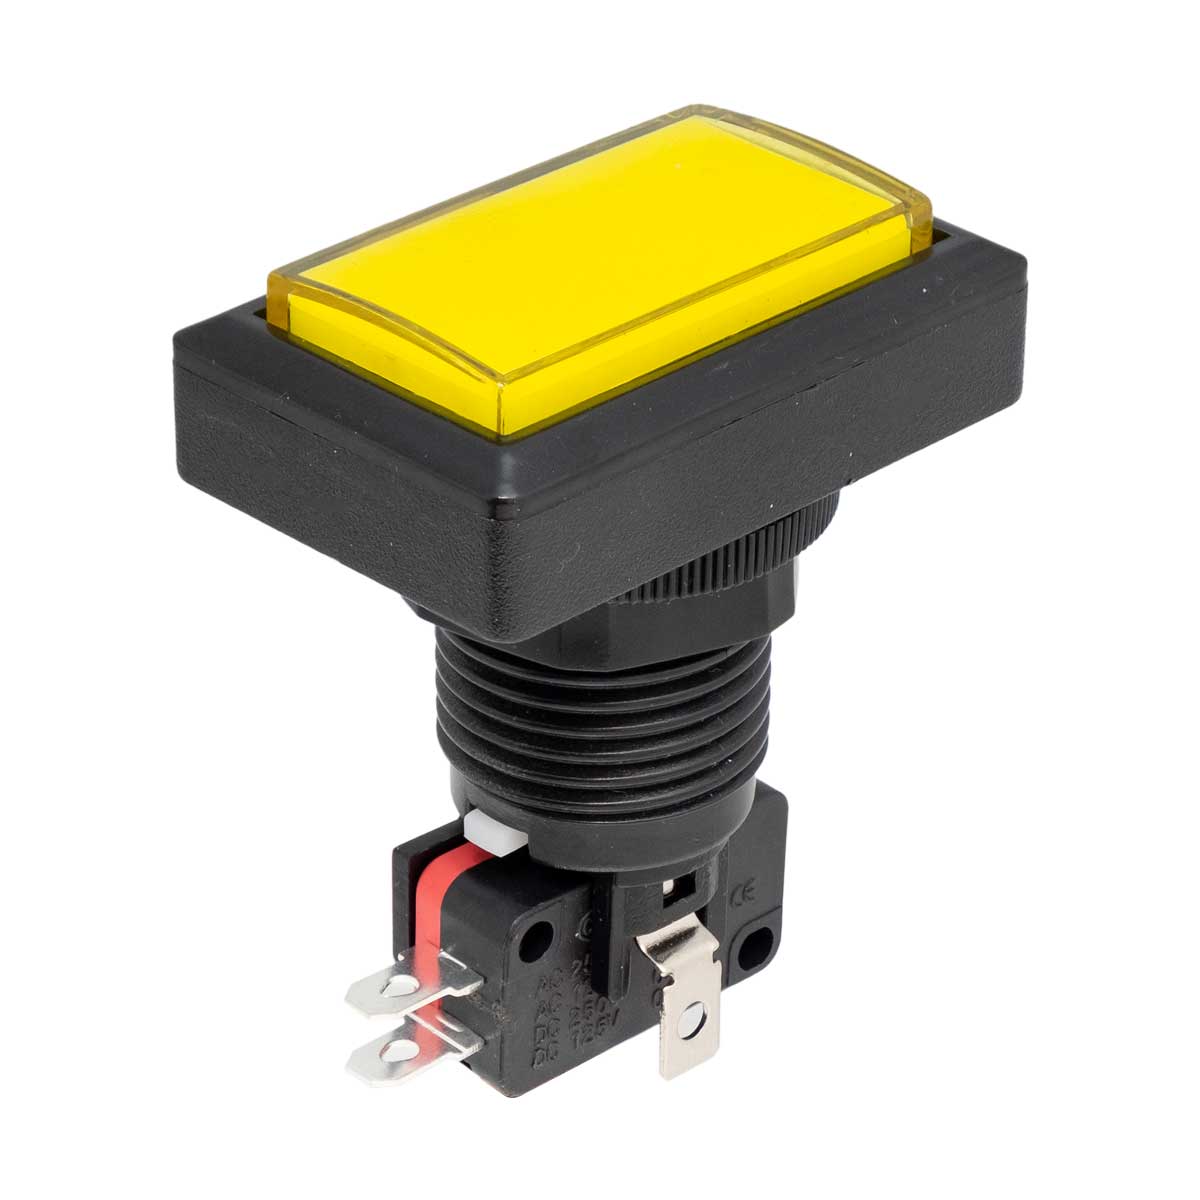 Arcade pushbutton with yellow LED, 41x23mm, Ø24mm, 16A/250V AC